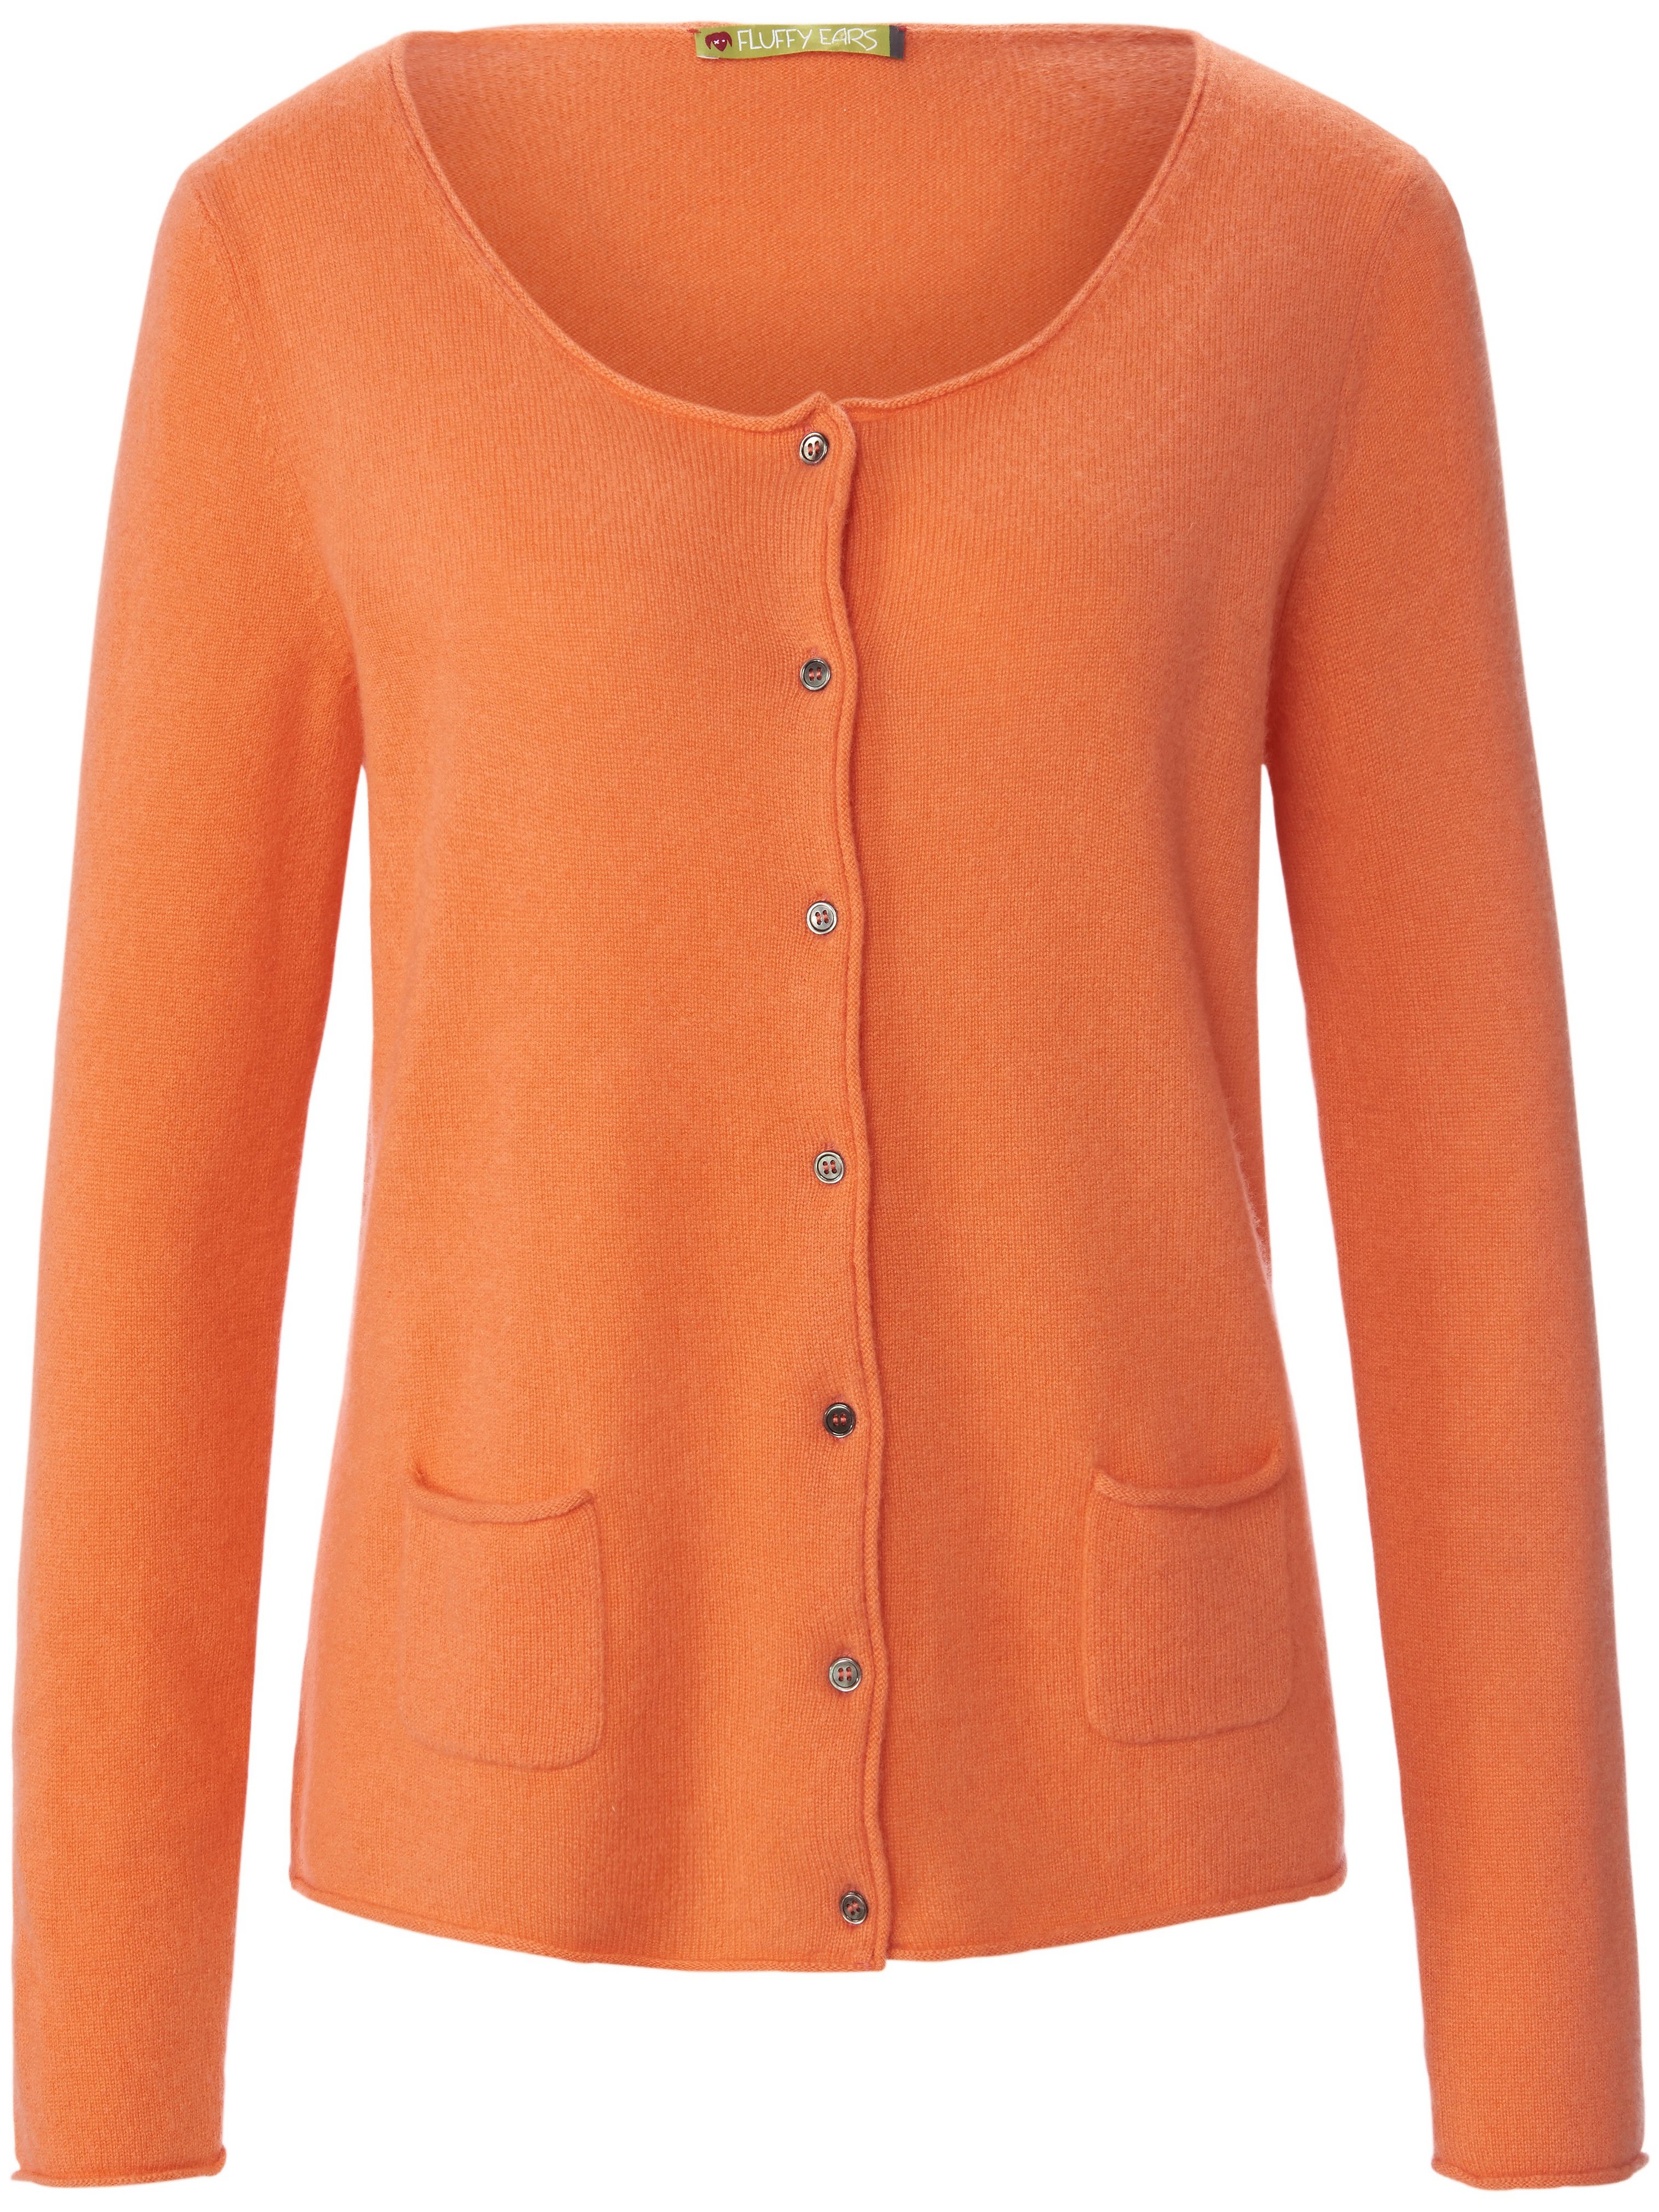 Le cardigan pur cachemire  FLUFFY EARS orange taille 44